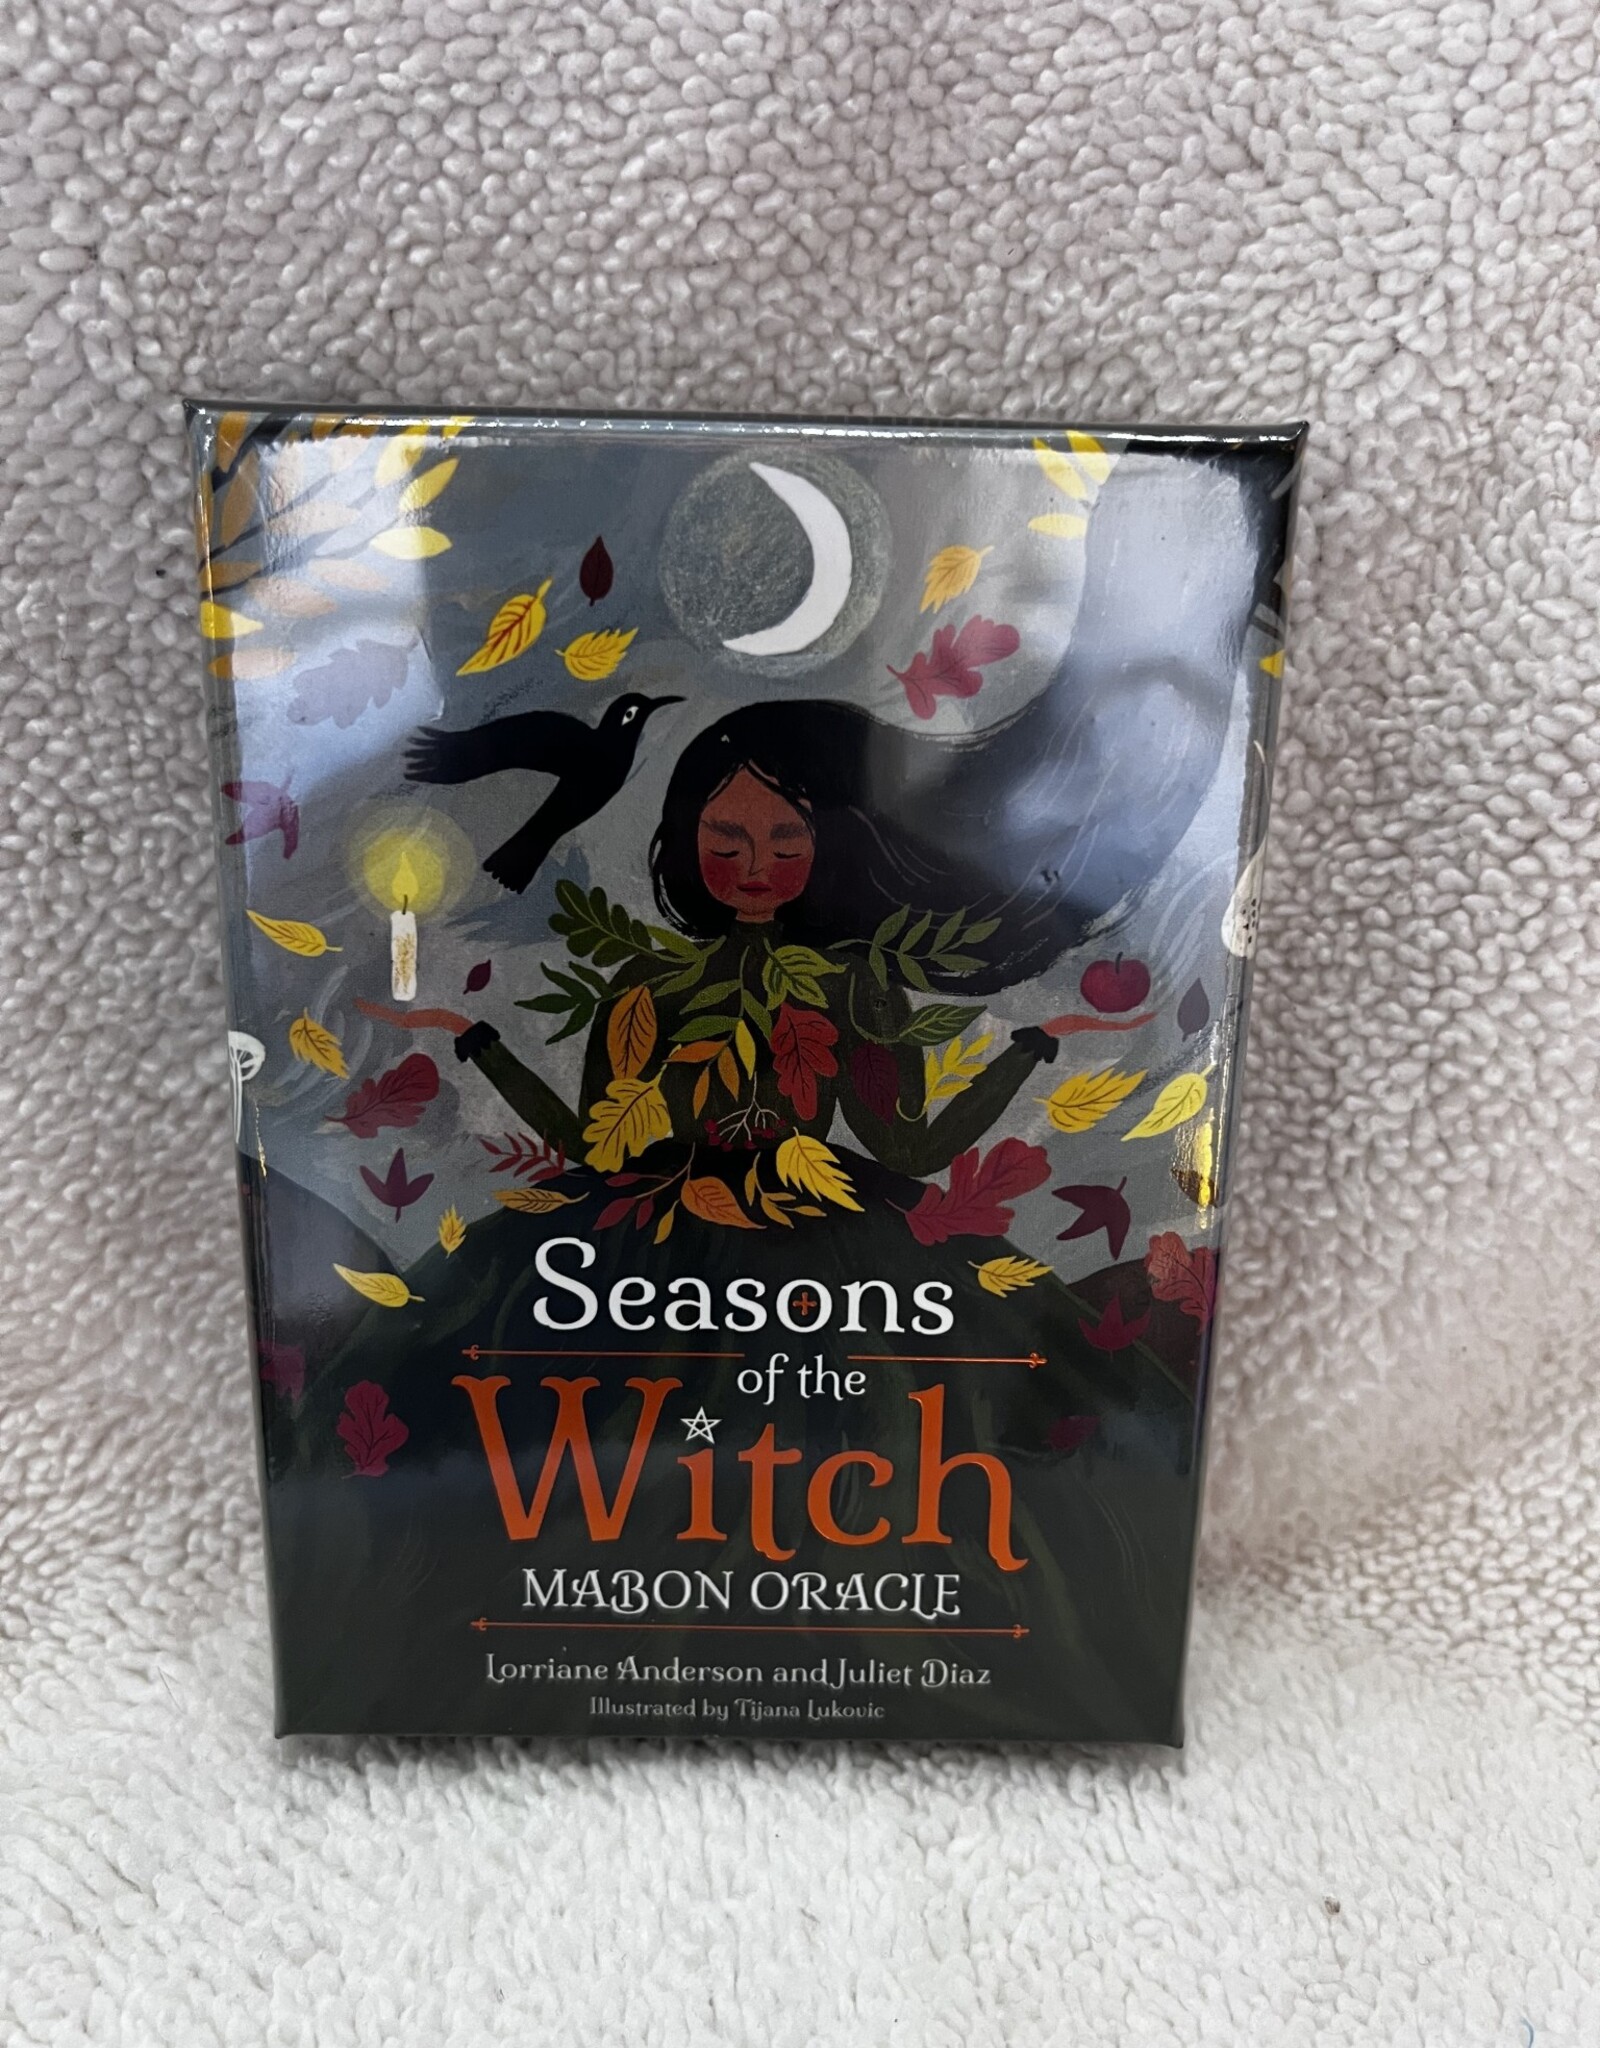 Seasons of the witch - Mabon